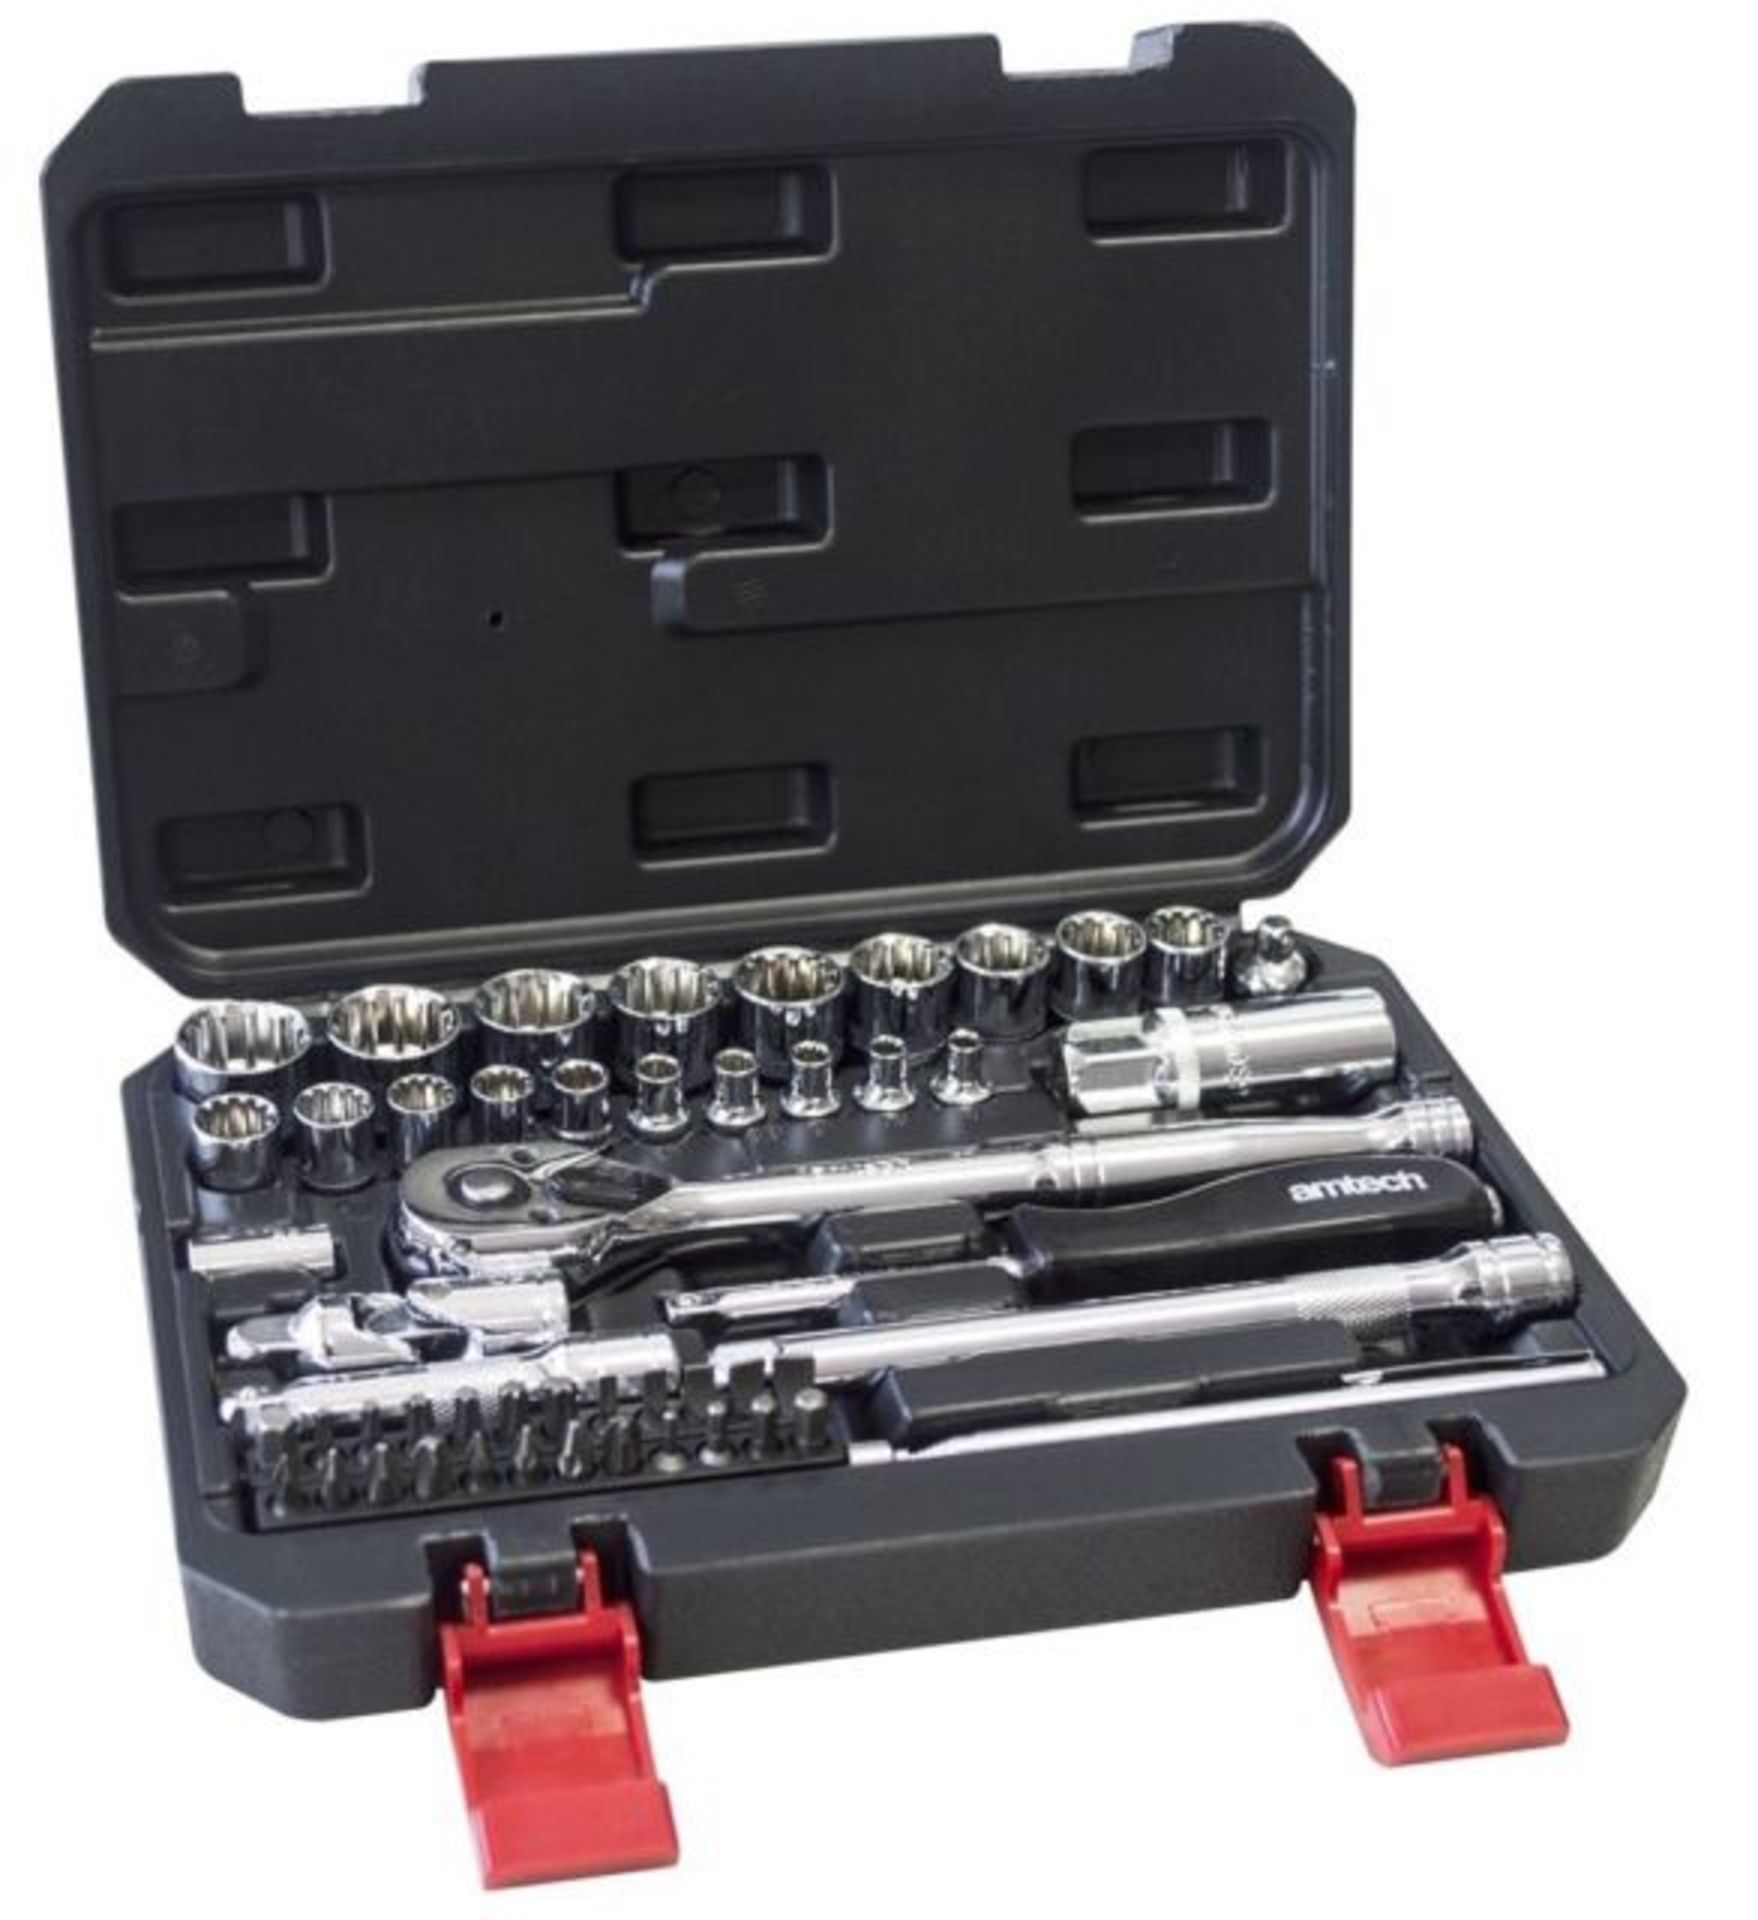 V *TRADE QTY* Brand New 52 Piece 1/4 & 3/8 inch 12 Point Drive Socket Set Incl Quick Release